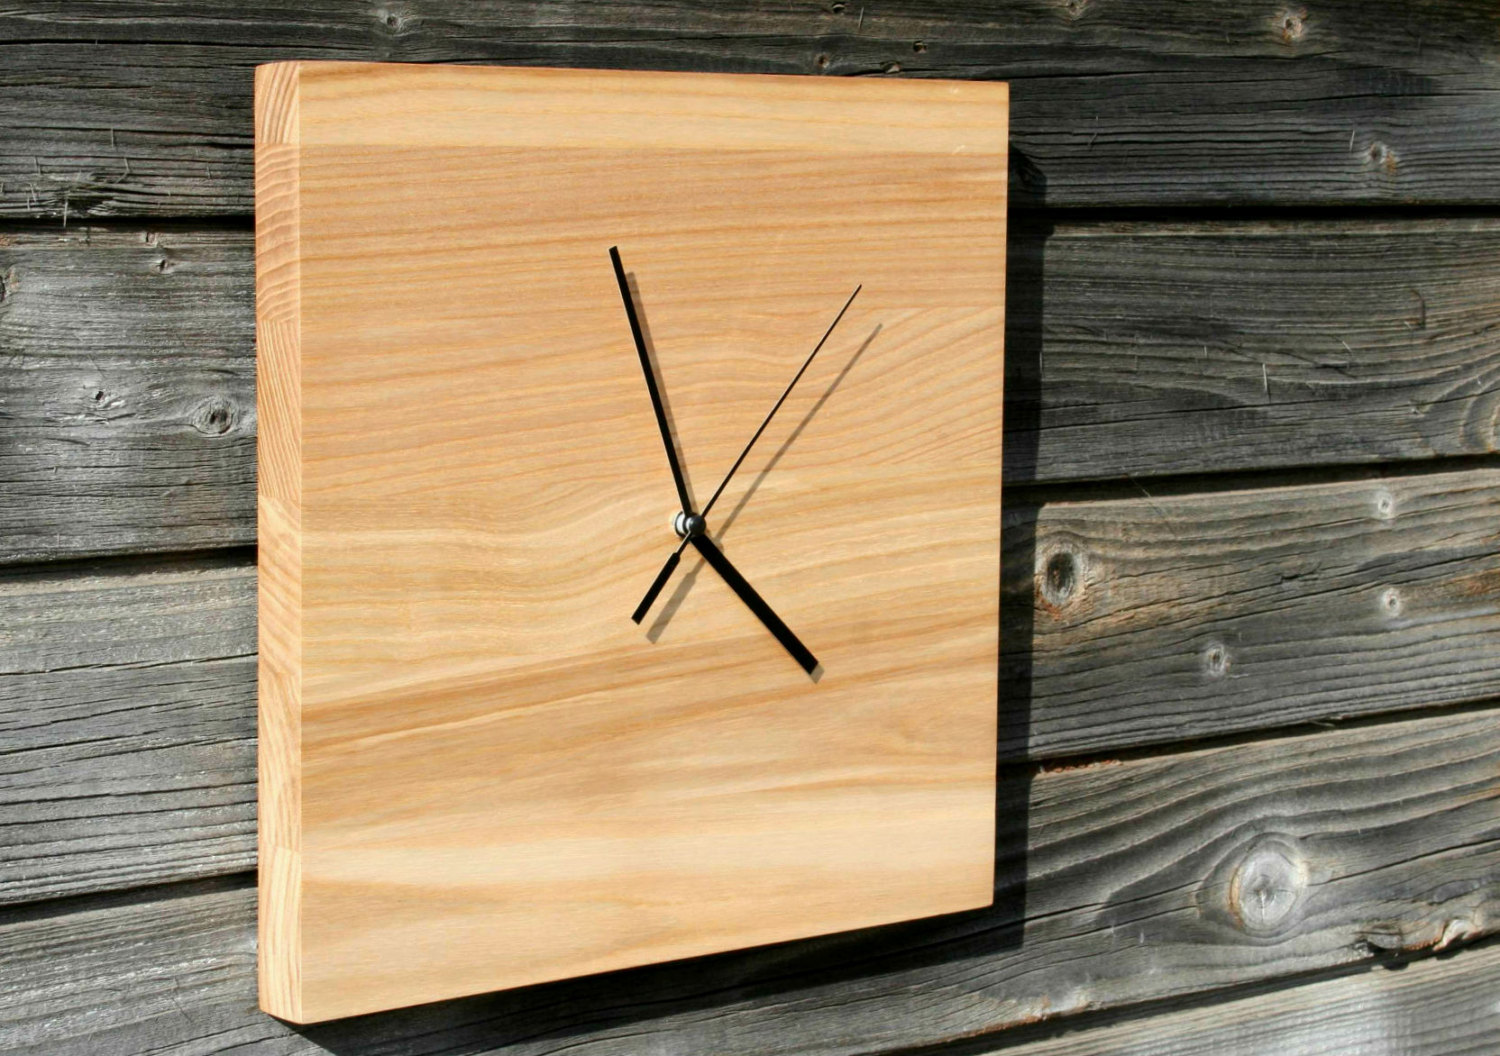 wall clock ideas for living room